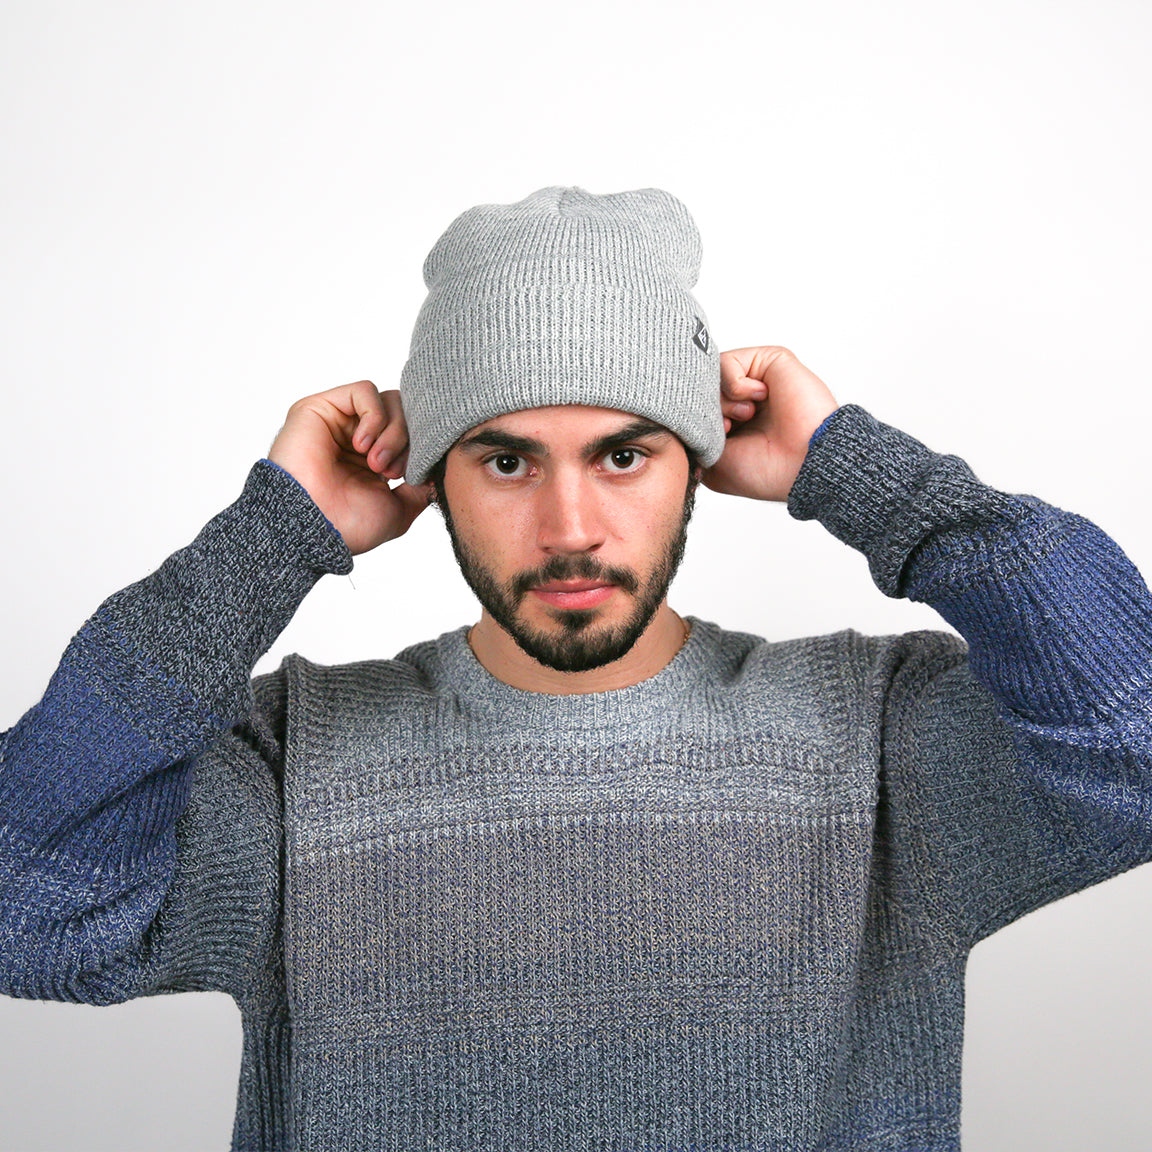 The wearer adjusts the light grey beanie, highlighting its flexible styling and the soft, ribbed texture, which adds a casual touch to the outfit.